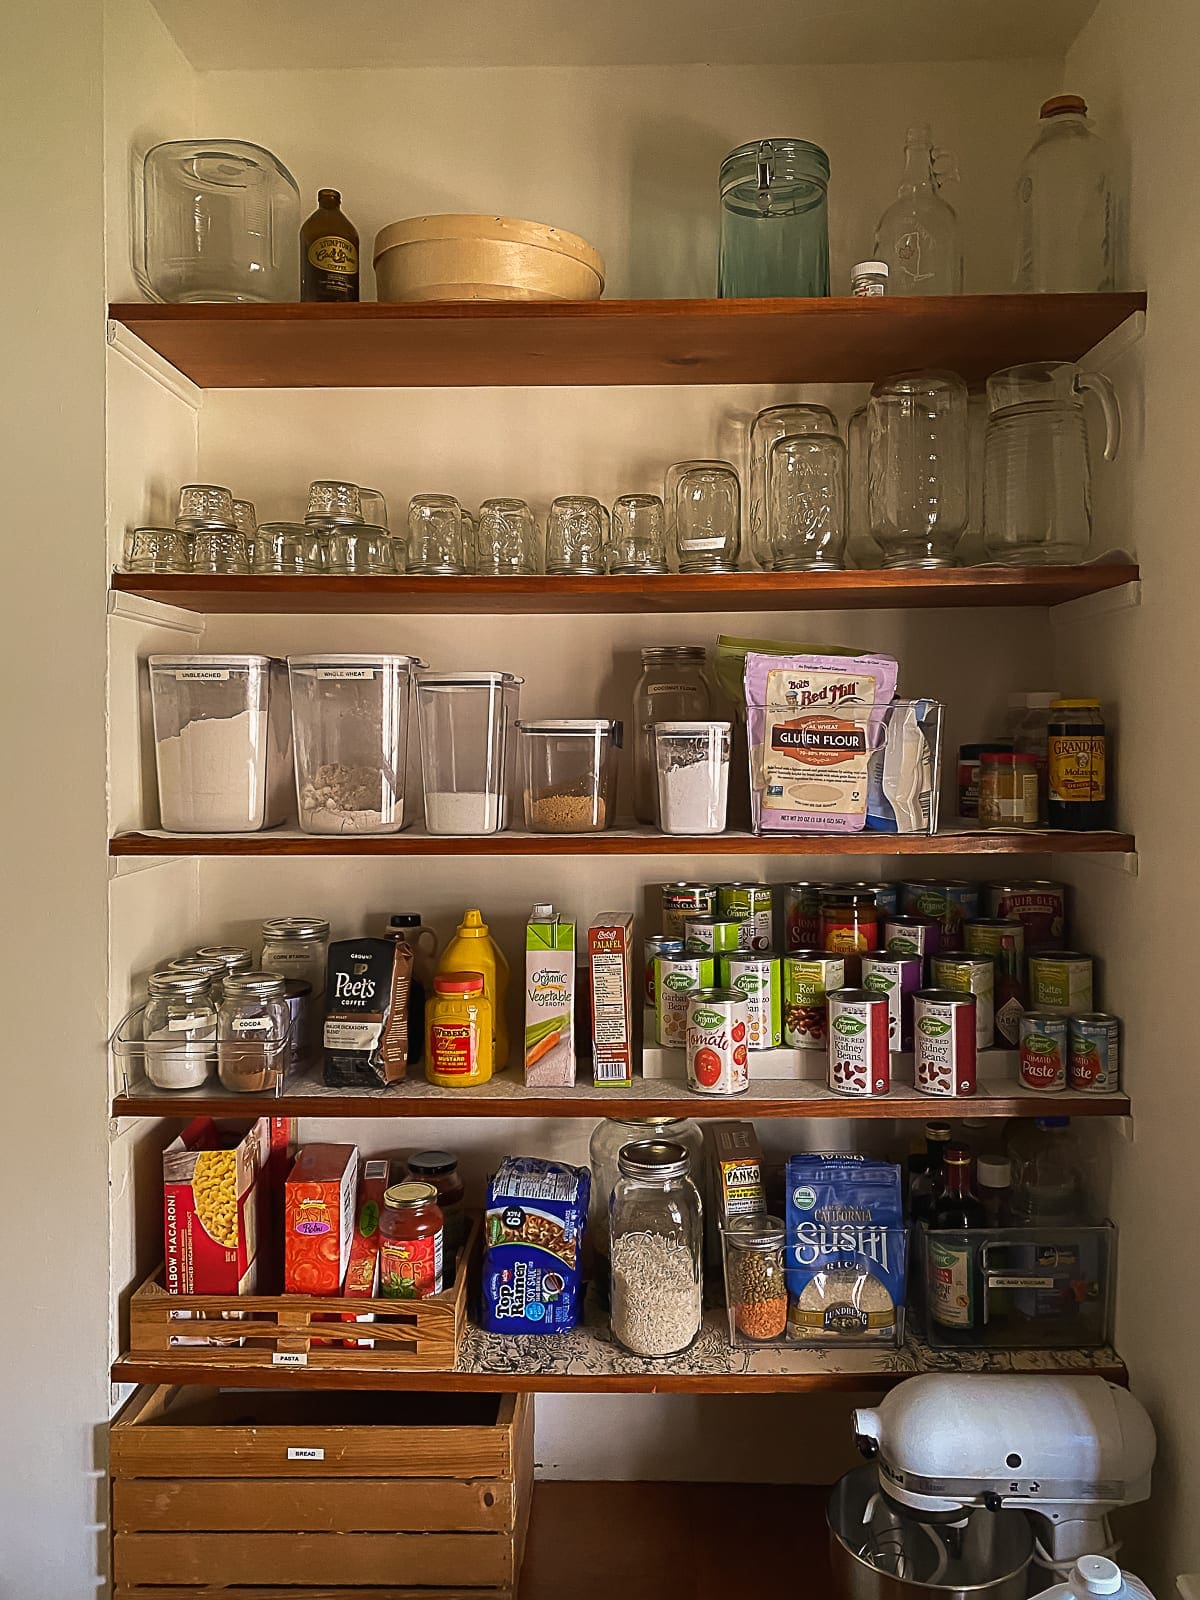 https://www.blakehillhouse.com/wp-content/uploads/2021/03/blake-hill-house-pantry-cleanup-and-organization-20.jpg